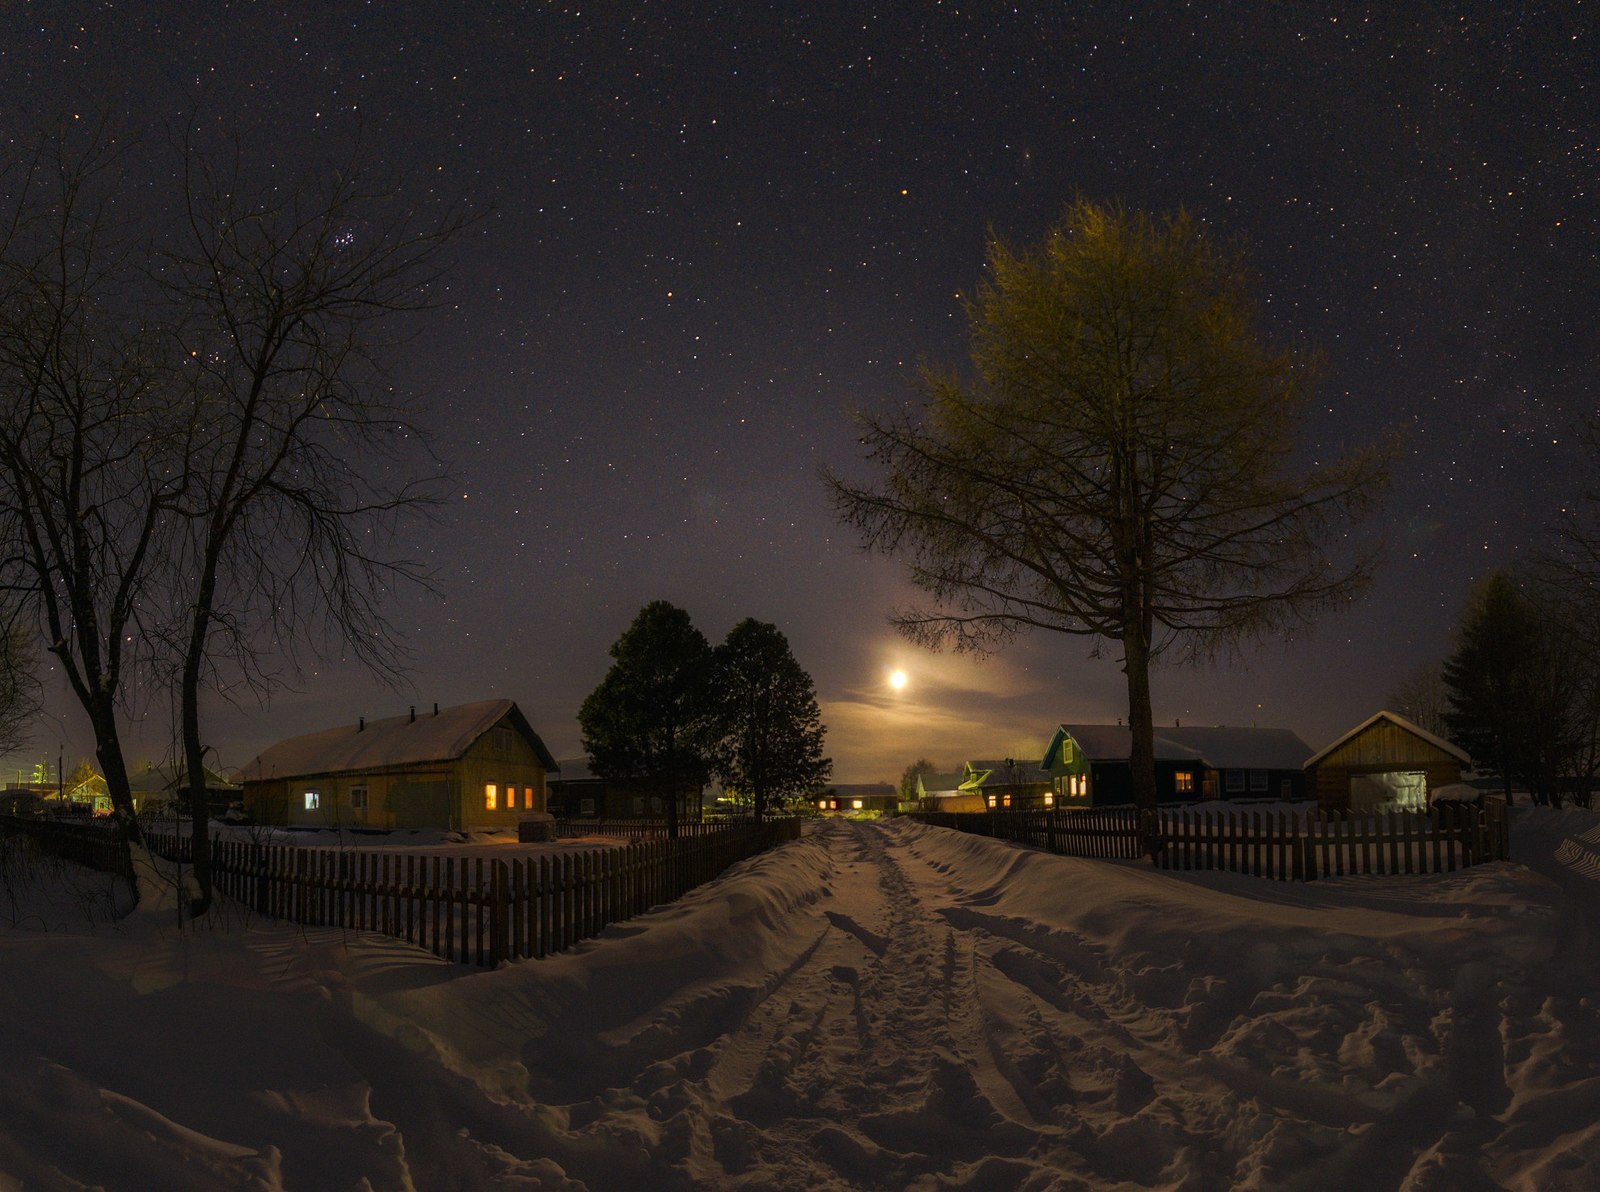 General 1600x1192 nature landscape winter snow Russia Moon stars house village trees night